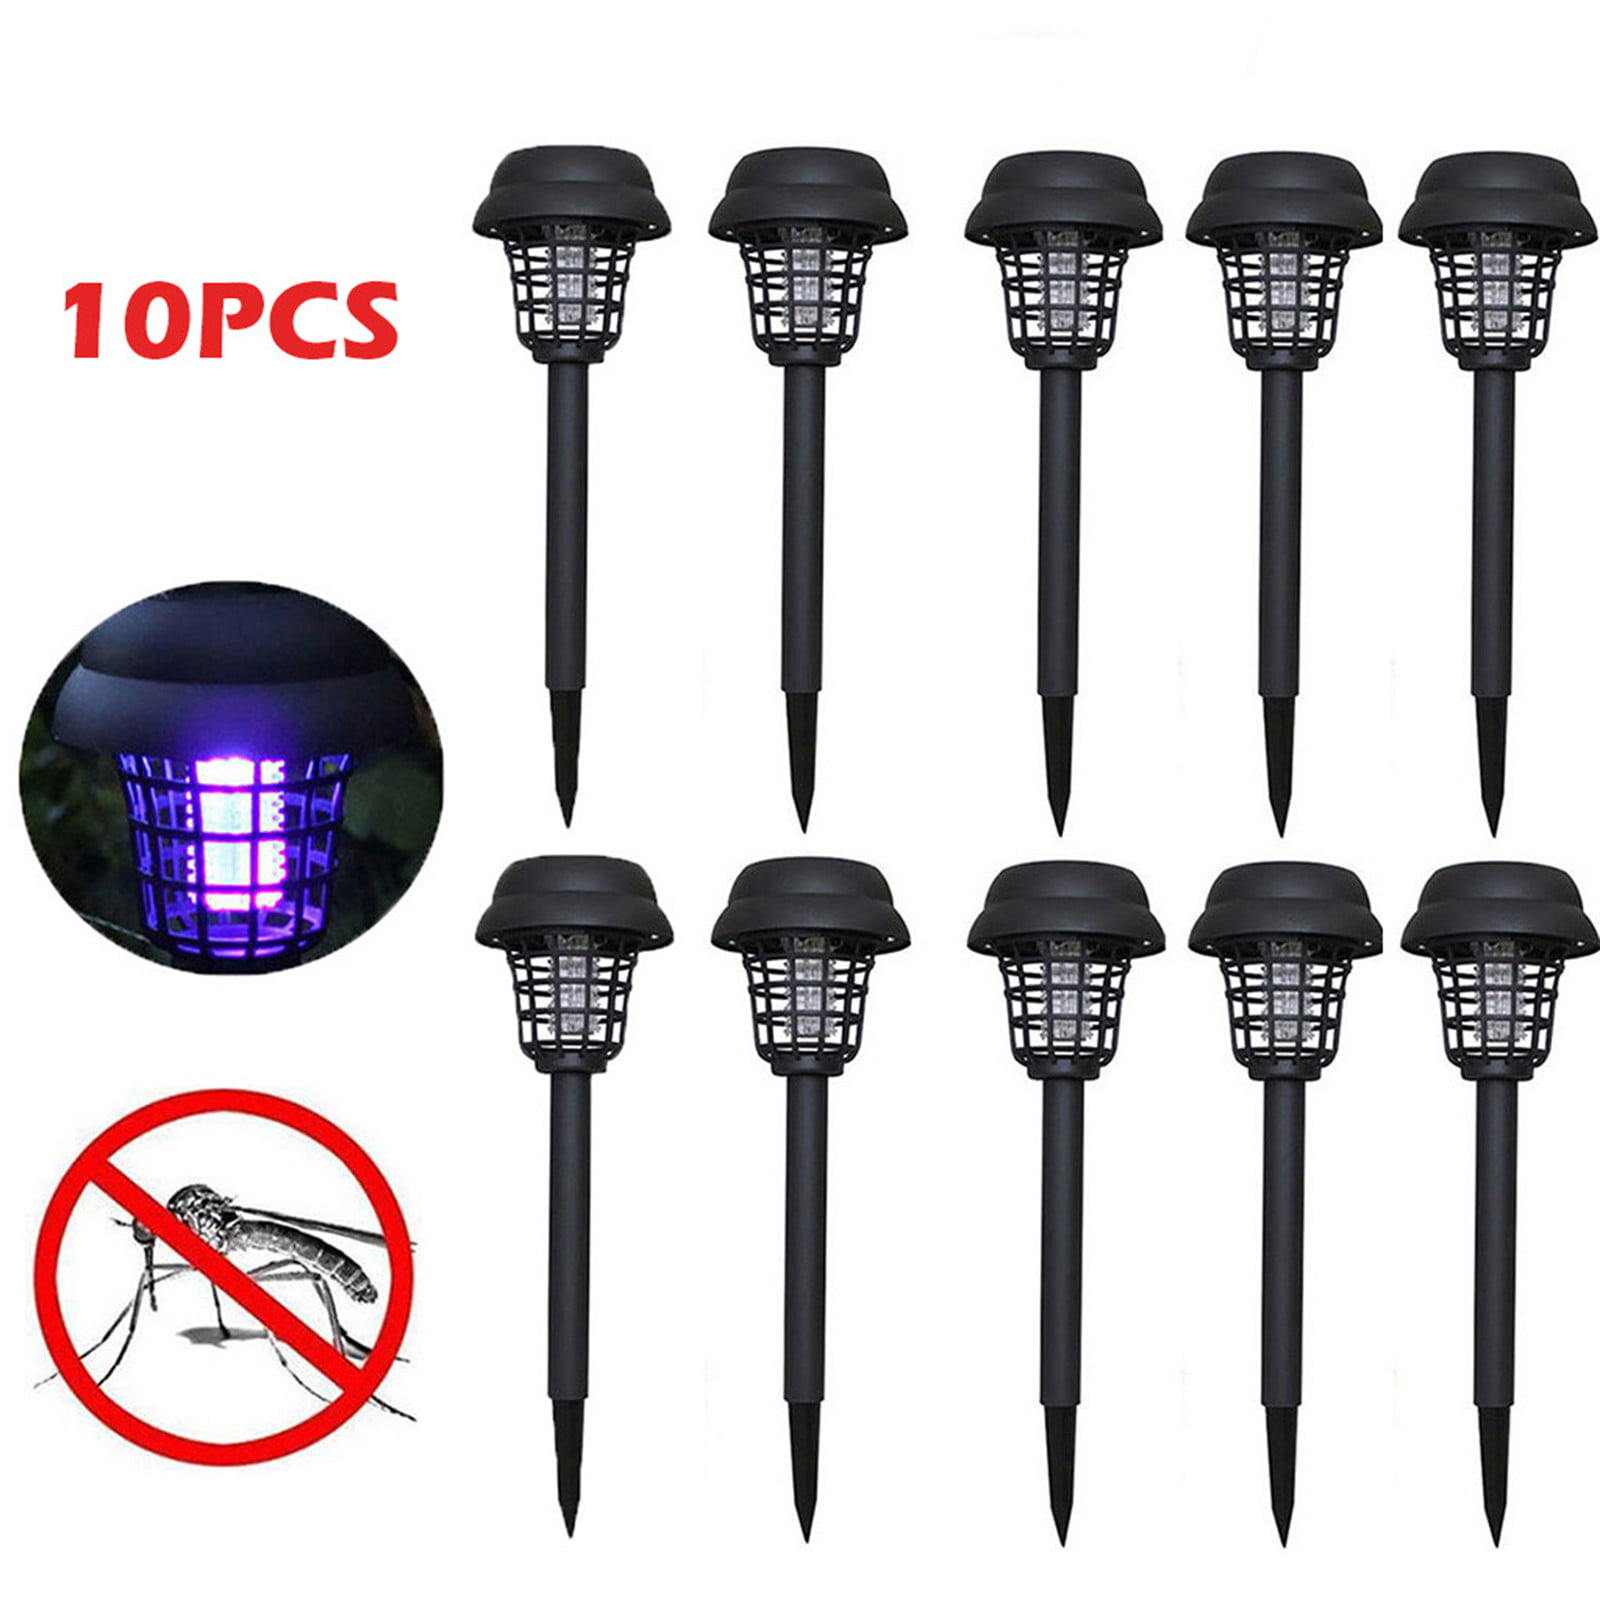 10XSolar Power Outdoor Mosquito Fly Bug Insect Zapper Killer Trap LED Lamp Light 